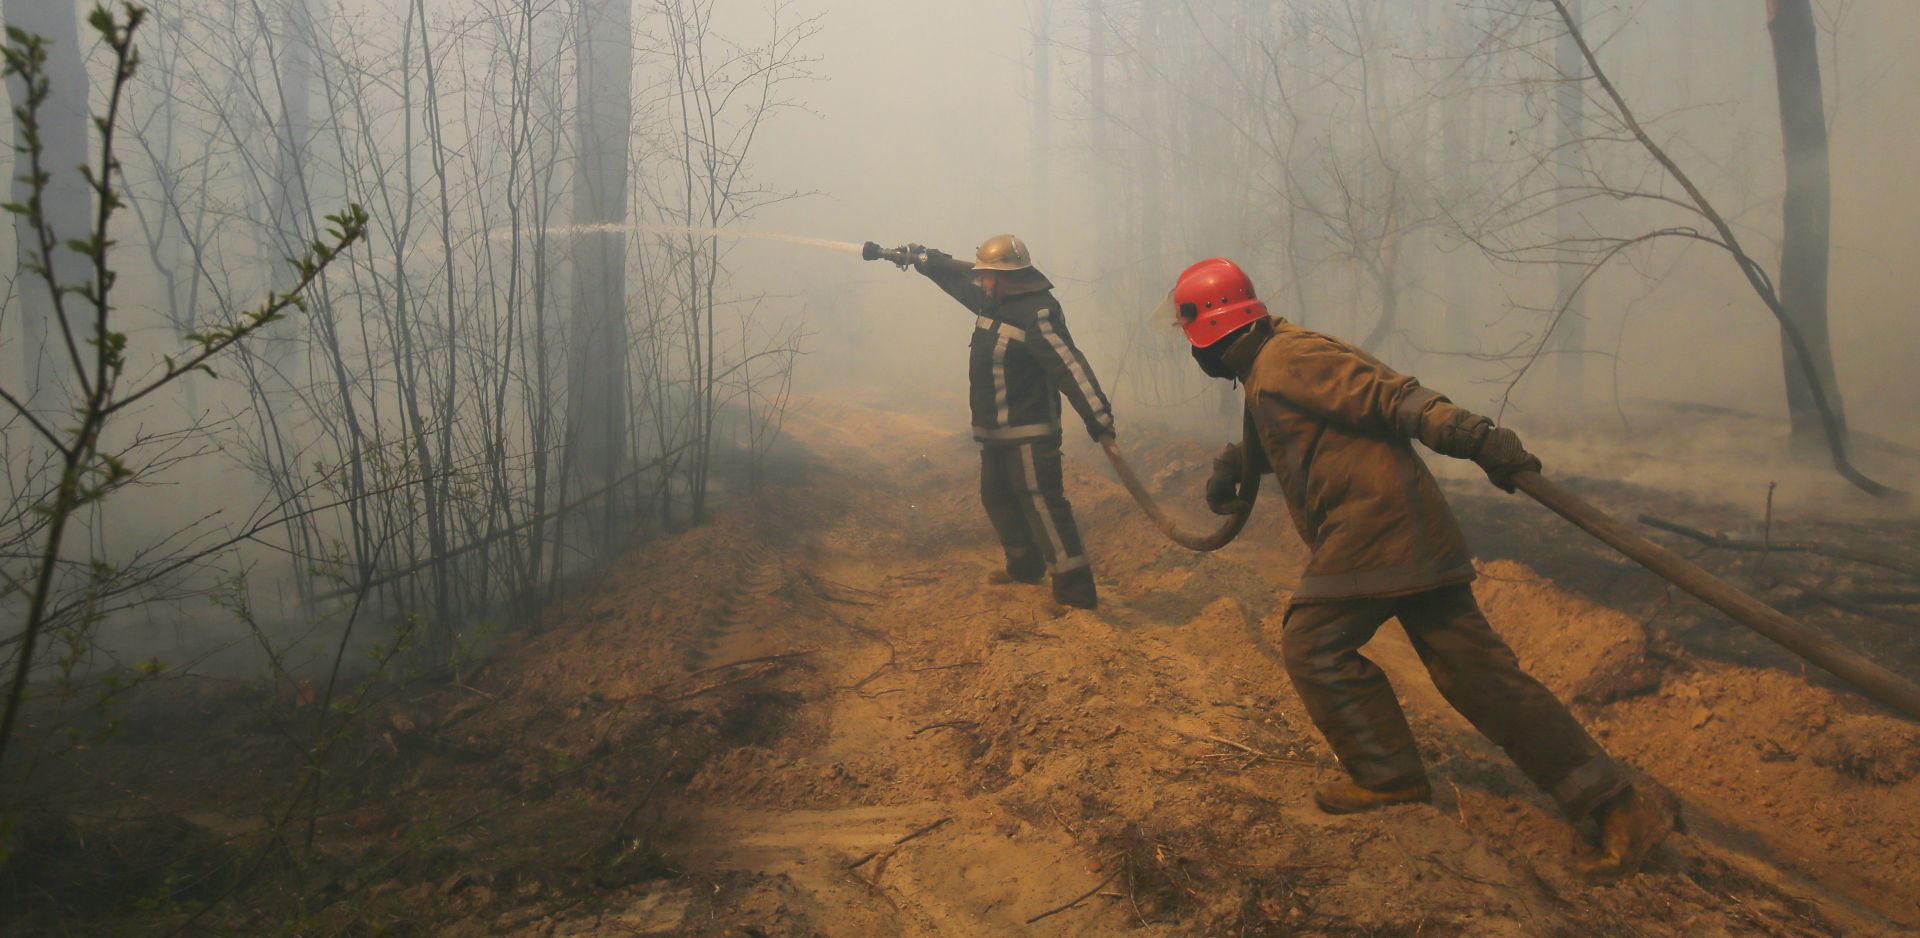 epa08357551 Ukrainian firemen fight with forest fire which burns near the village of Ragovka, close to the exclusion zone around the Chernobyl nuclear power plant, Ukraine, 10 April 2020 (issued 11 April 2020). Officials have been fighting fires in the exclusion zone since 04 April 2020. In early April 2020, NASA satellites observed several wildfires in northern Ukraine around the Chornobyl Exclusion Zone as local media report. Hundreds of firefighters and at least eight airborne units were working to extinguish fires in the Denysovets, Kotovsky, and Korogodsky forests, NASA's Earth Observatory reports. The territory is a long-vacated area near where an explosion at the Chernobyl Soviet nuclear plant in April 1986 sent a plume of radioactive fallout high into the air and across swaths of Europe.  EPA/STR